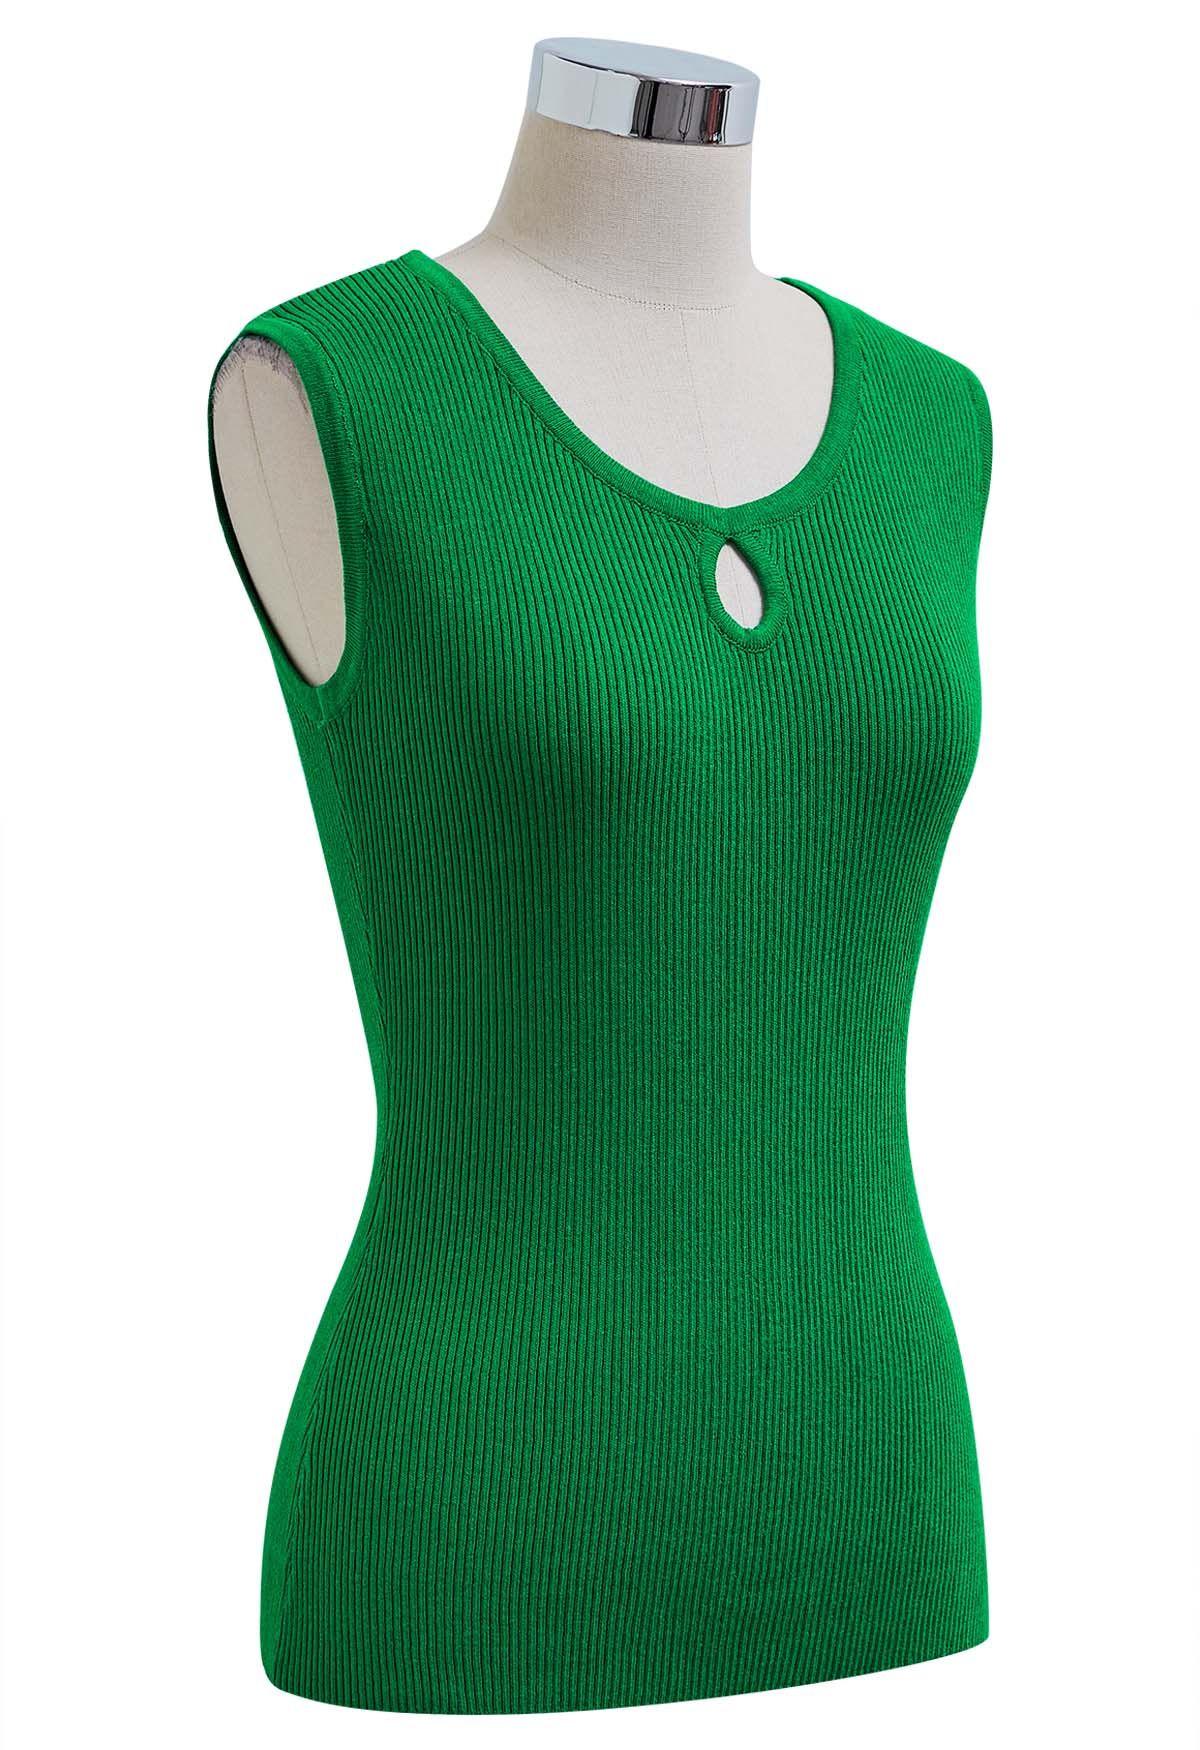 Cutout Detailing Sleeveless Knit Top in Green